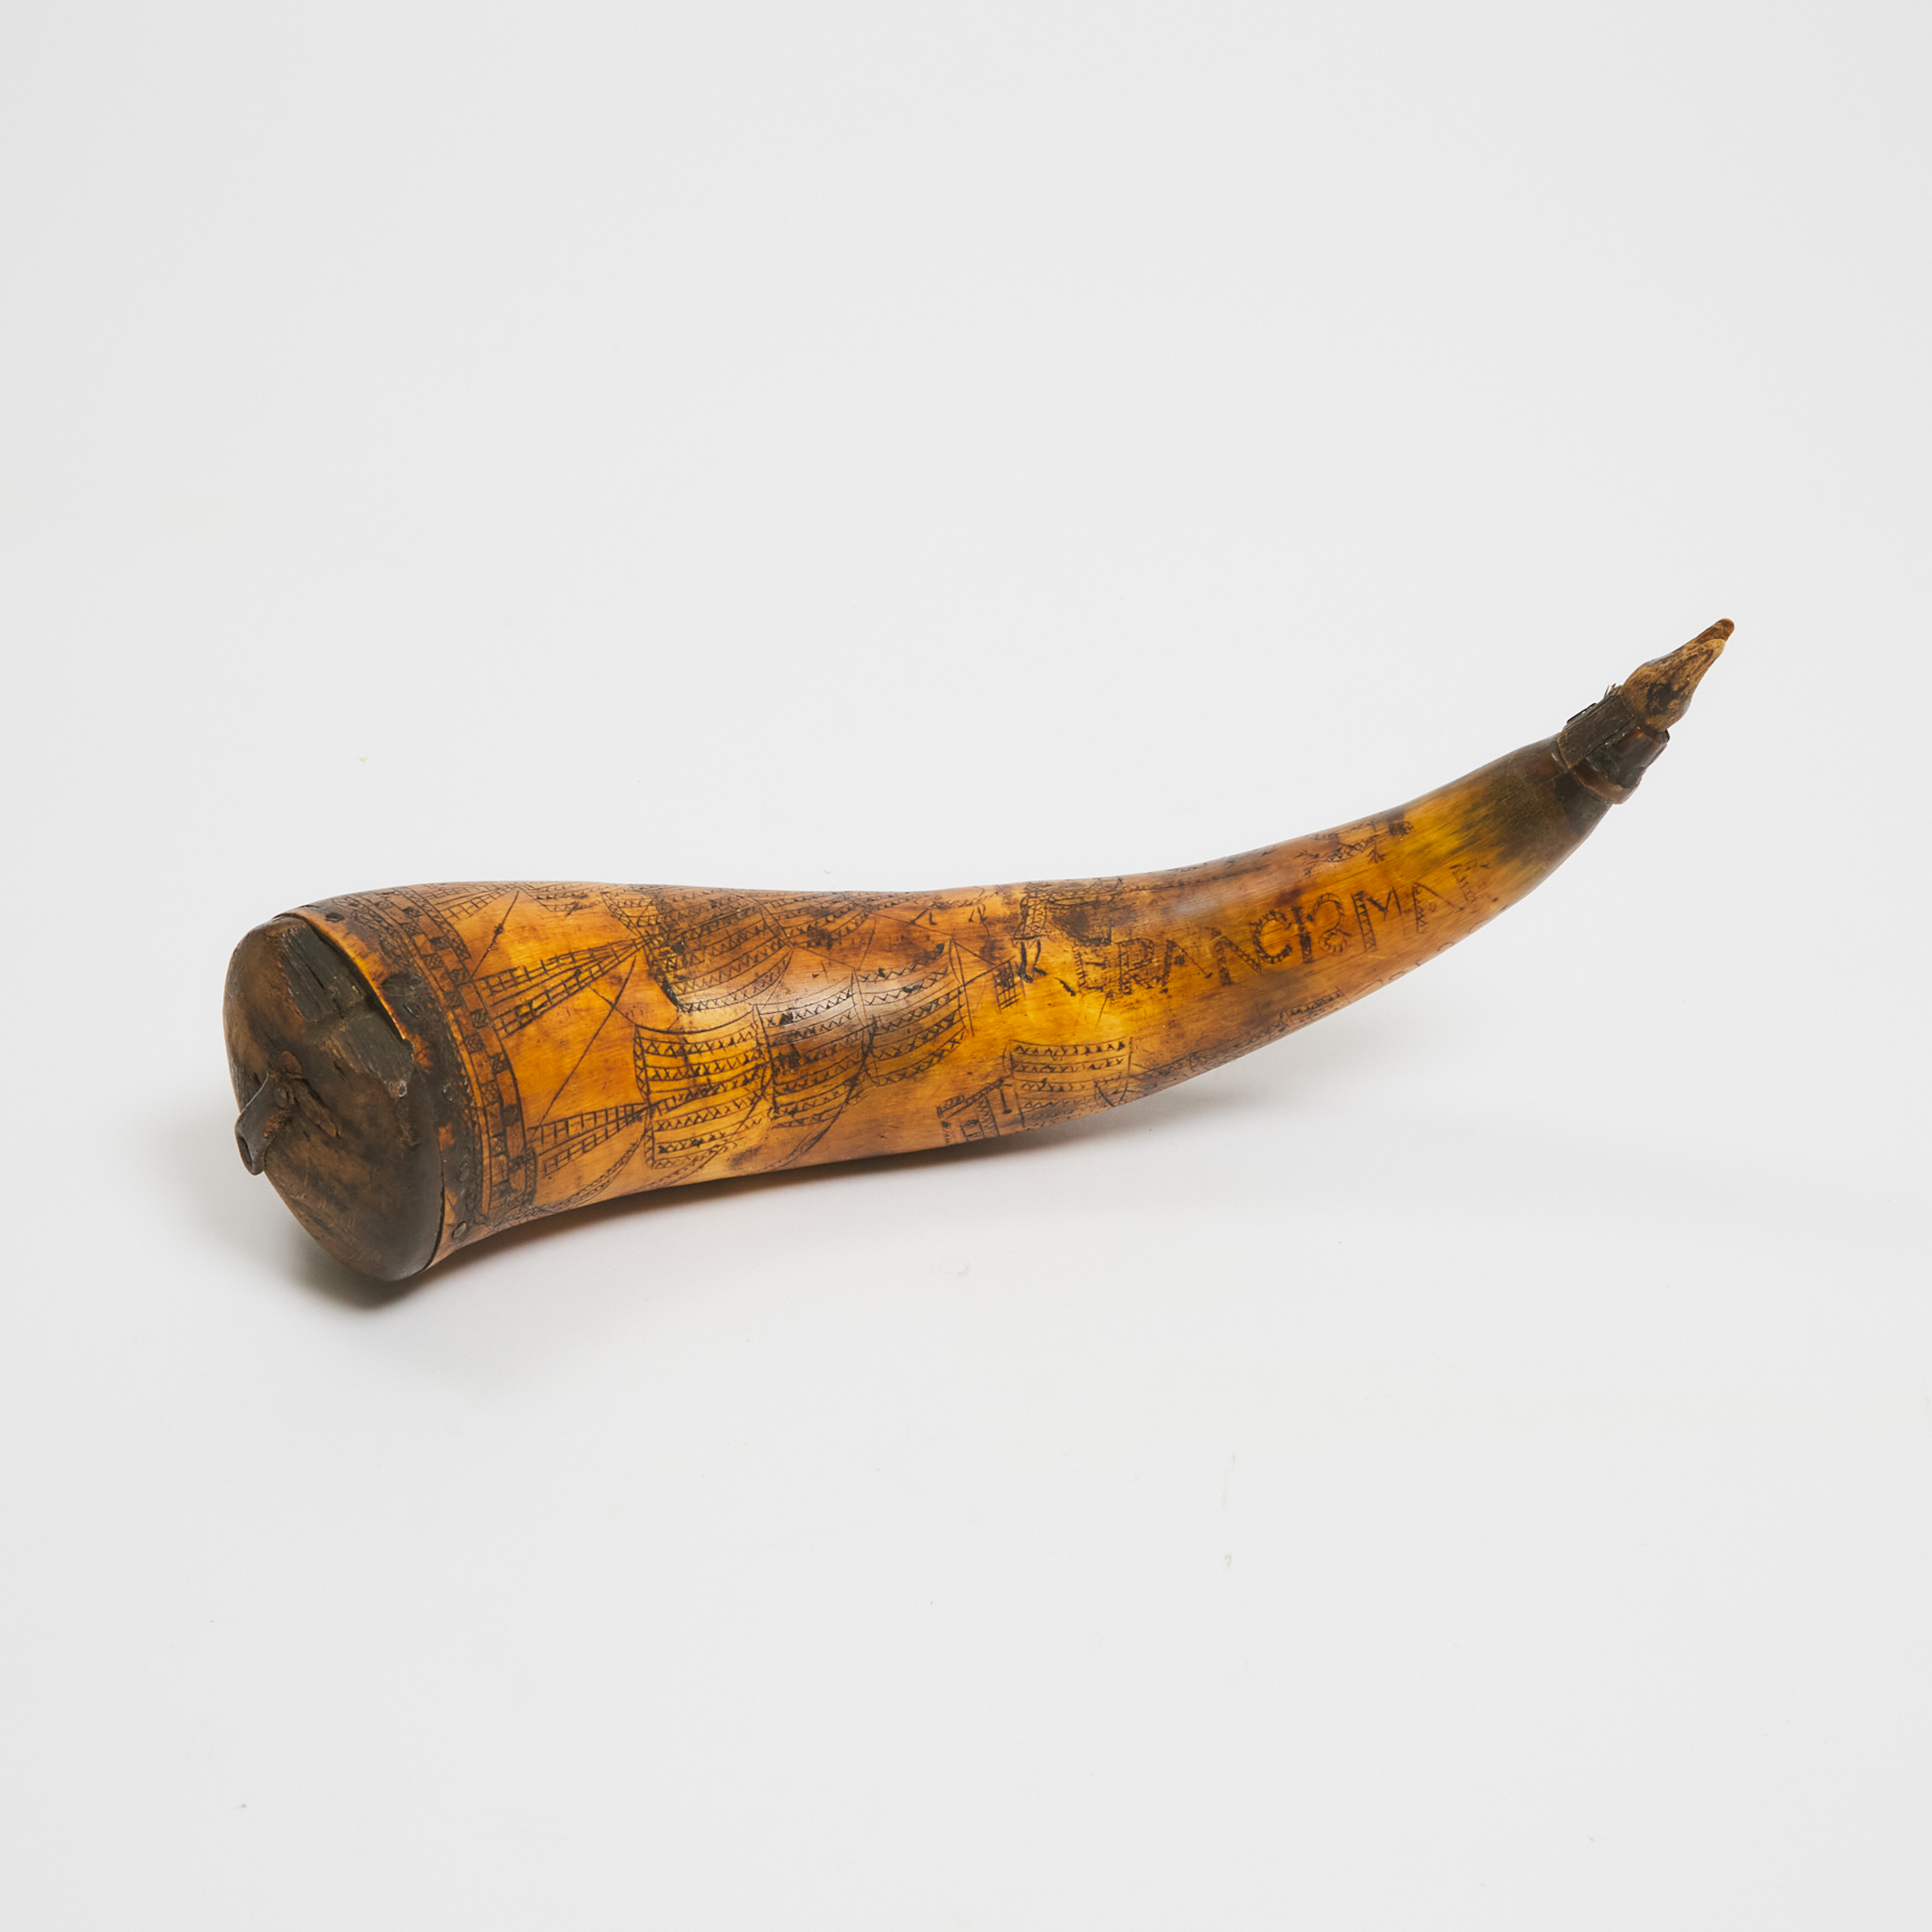 French and Indian (Seven Years) War Powder Horn, mid 18th century